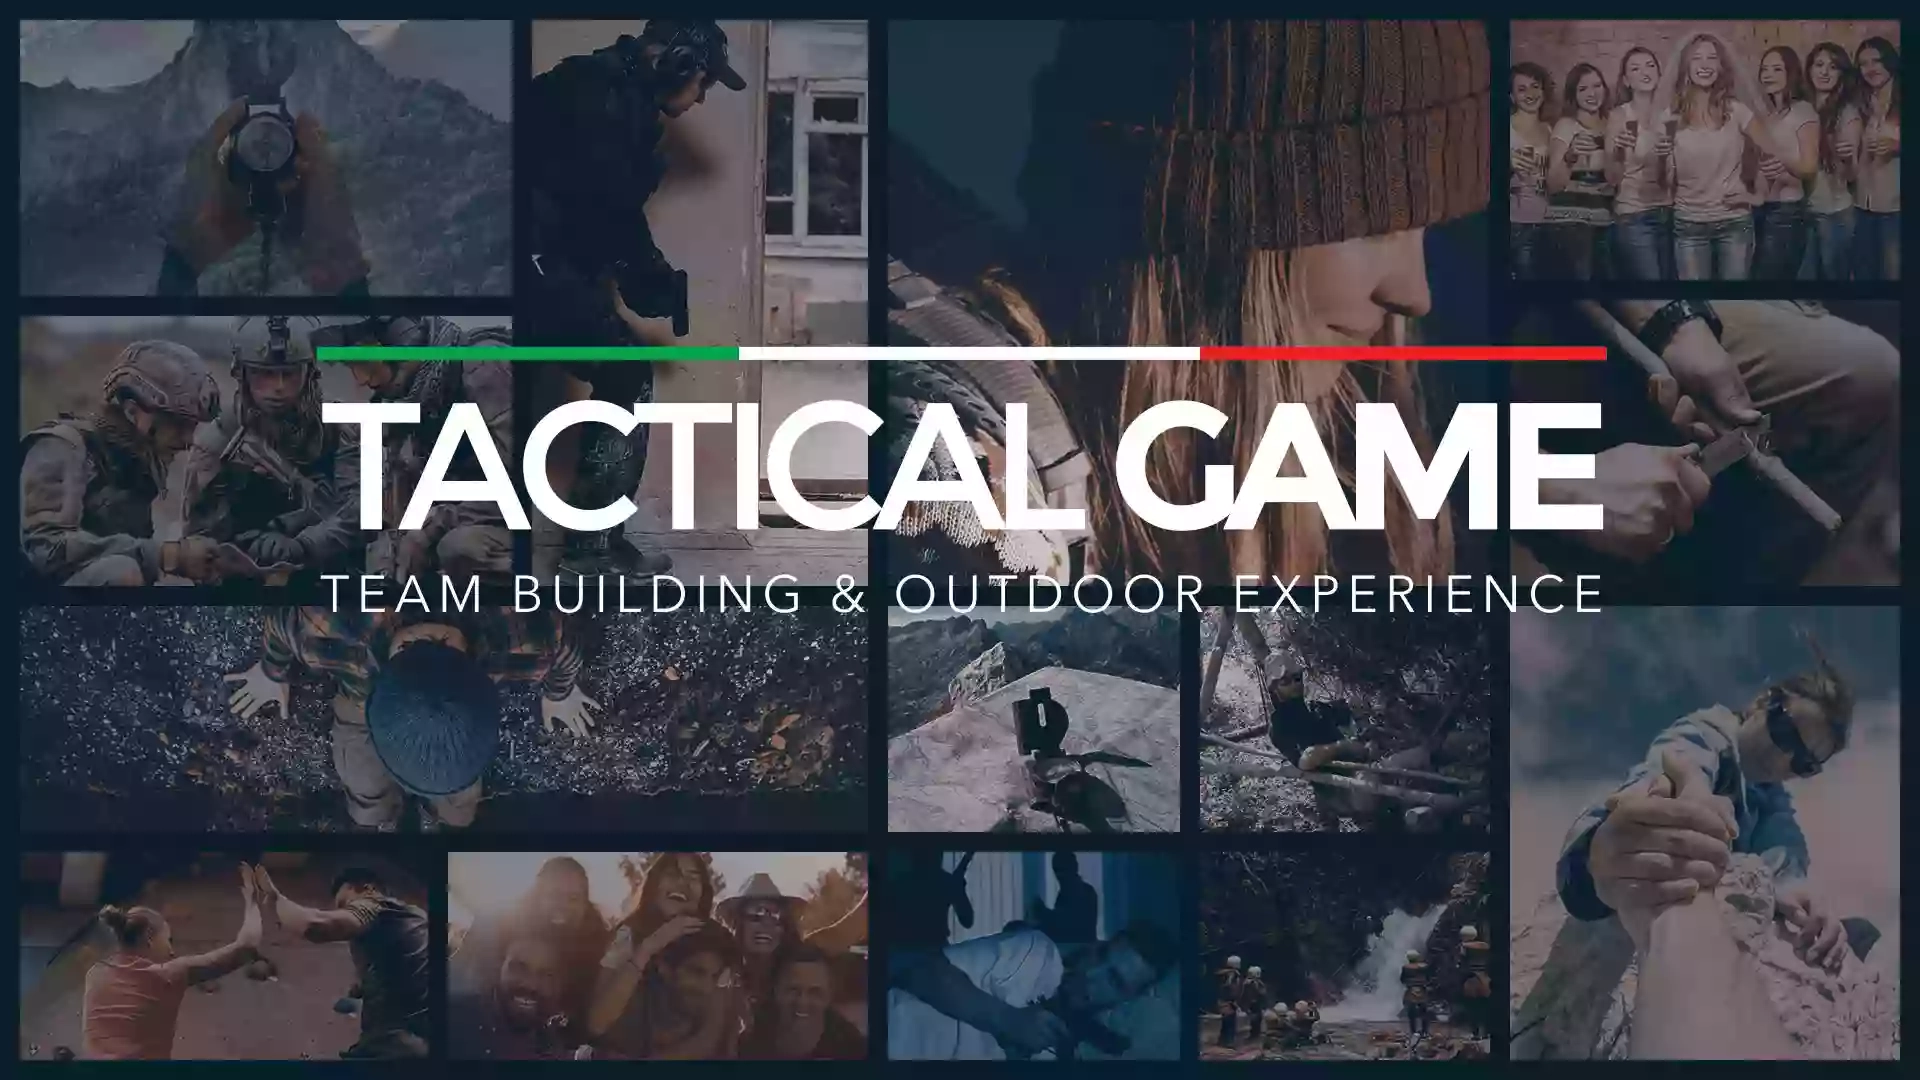 Tactical Game - Team Building & Outdoor Experience